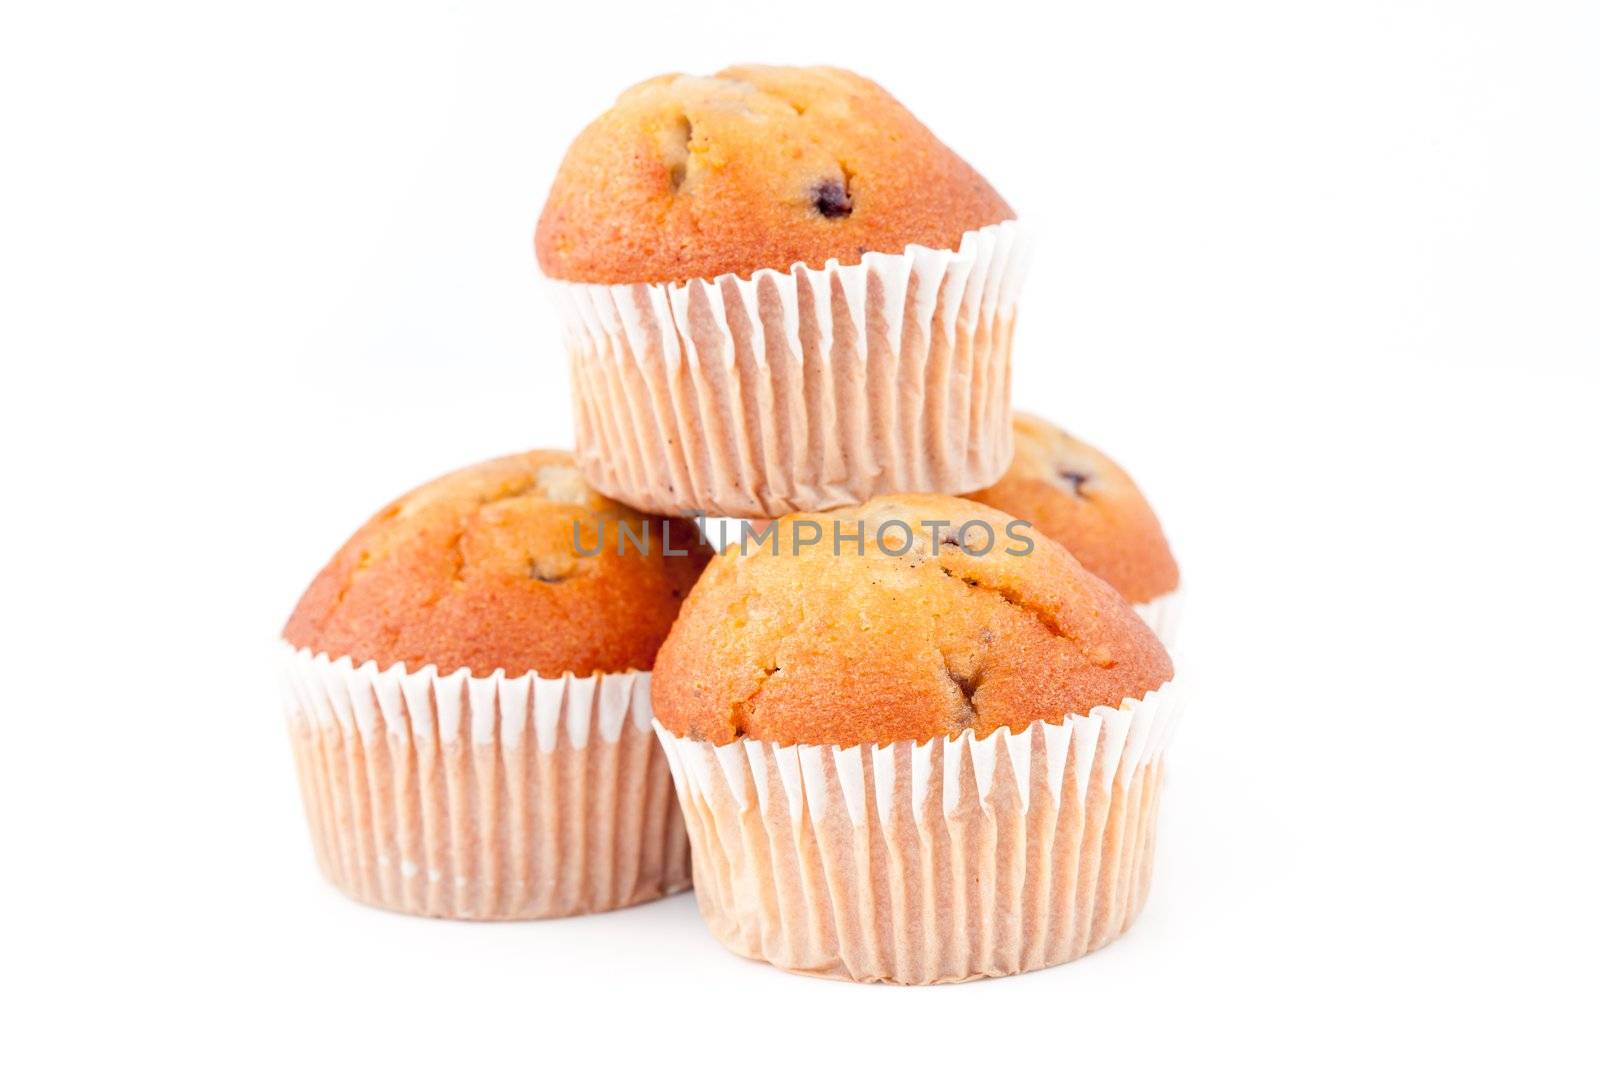 Pyramid of muffins against a white background